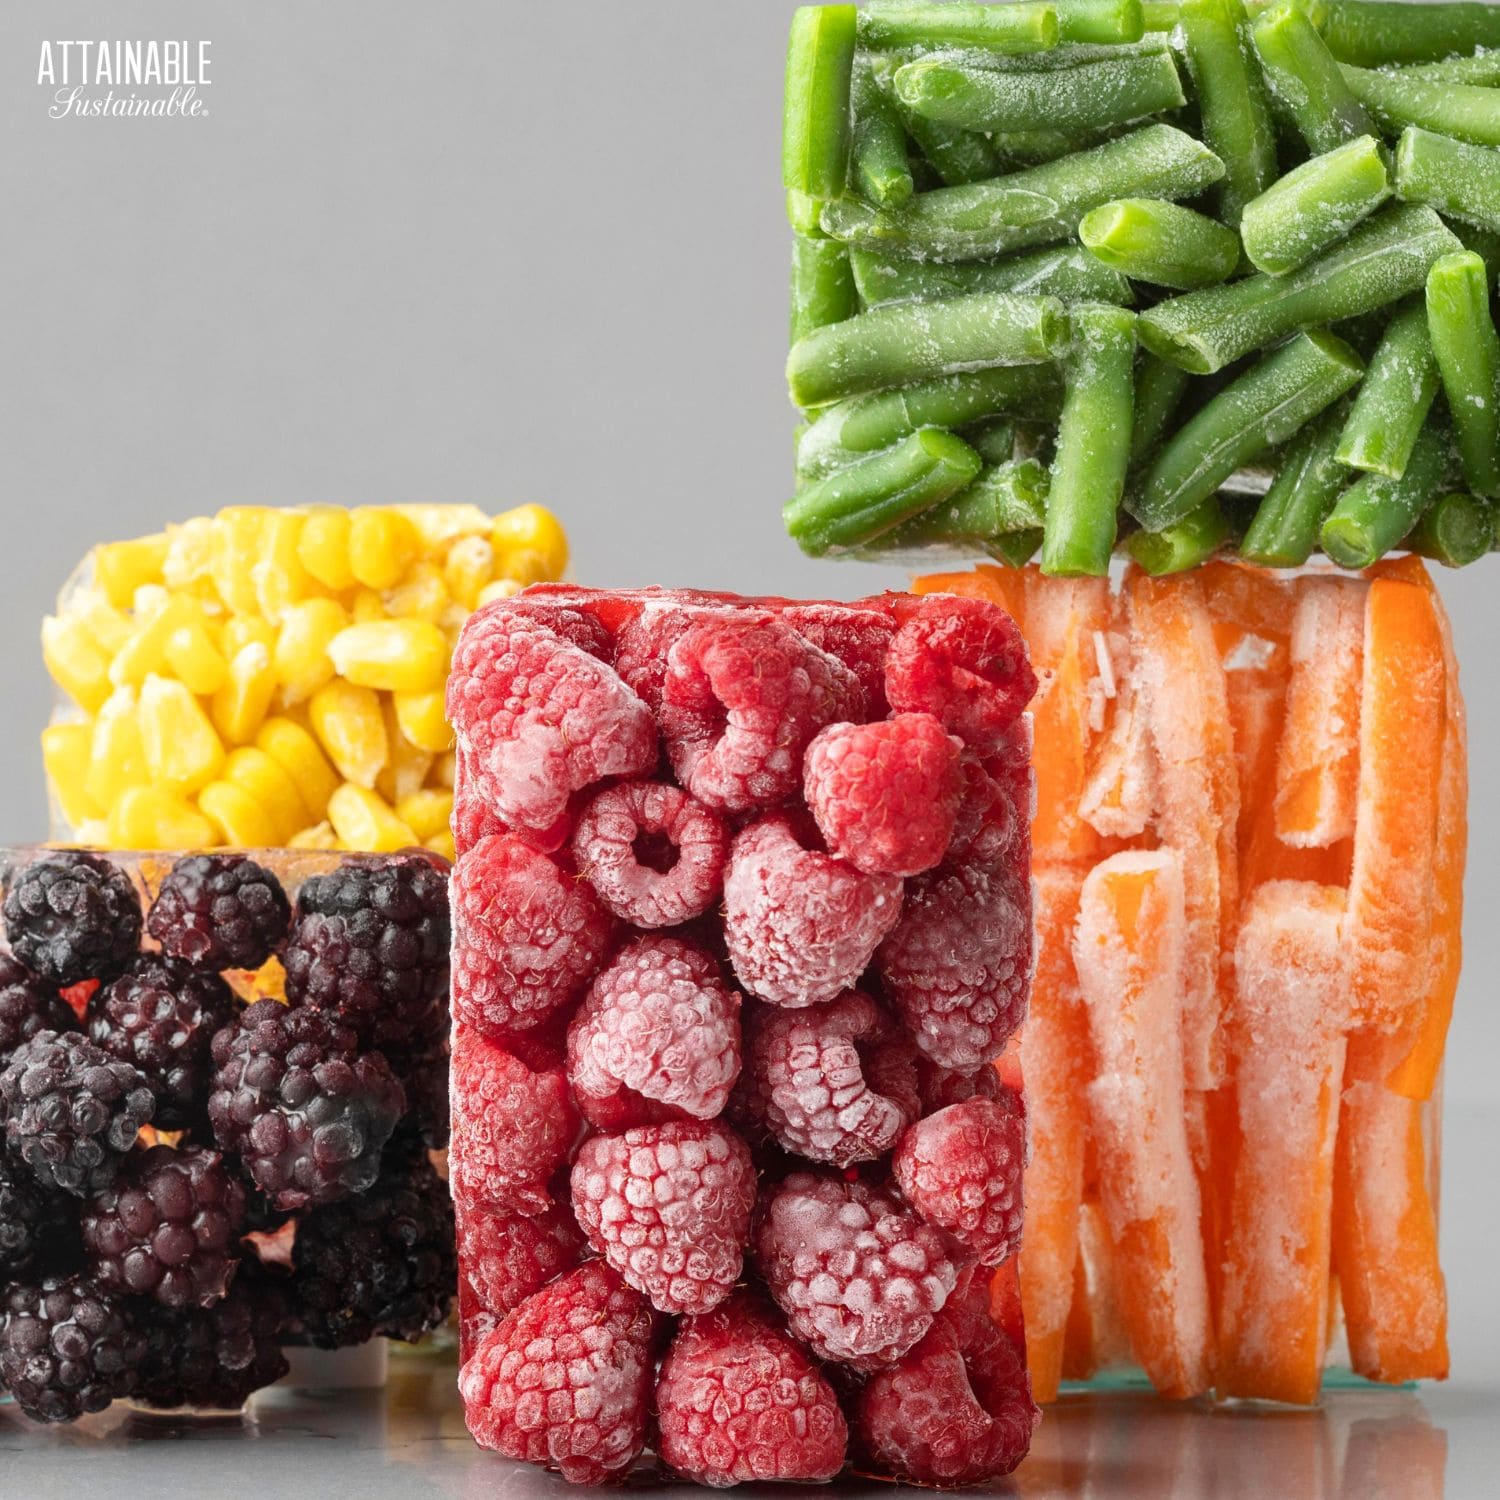 frozen produce in blocks with no container.